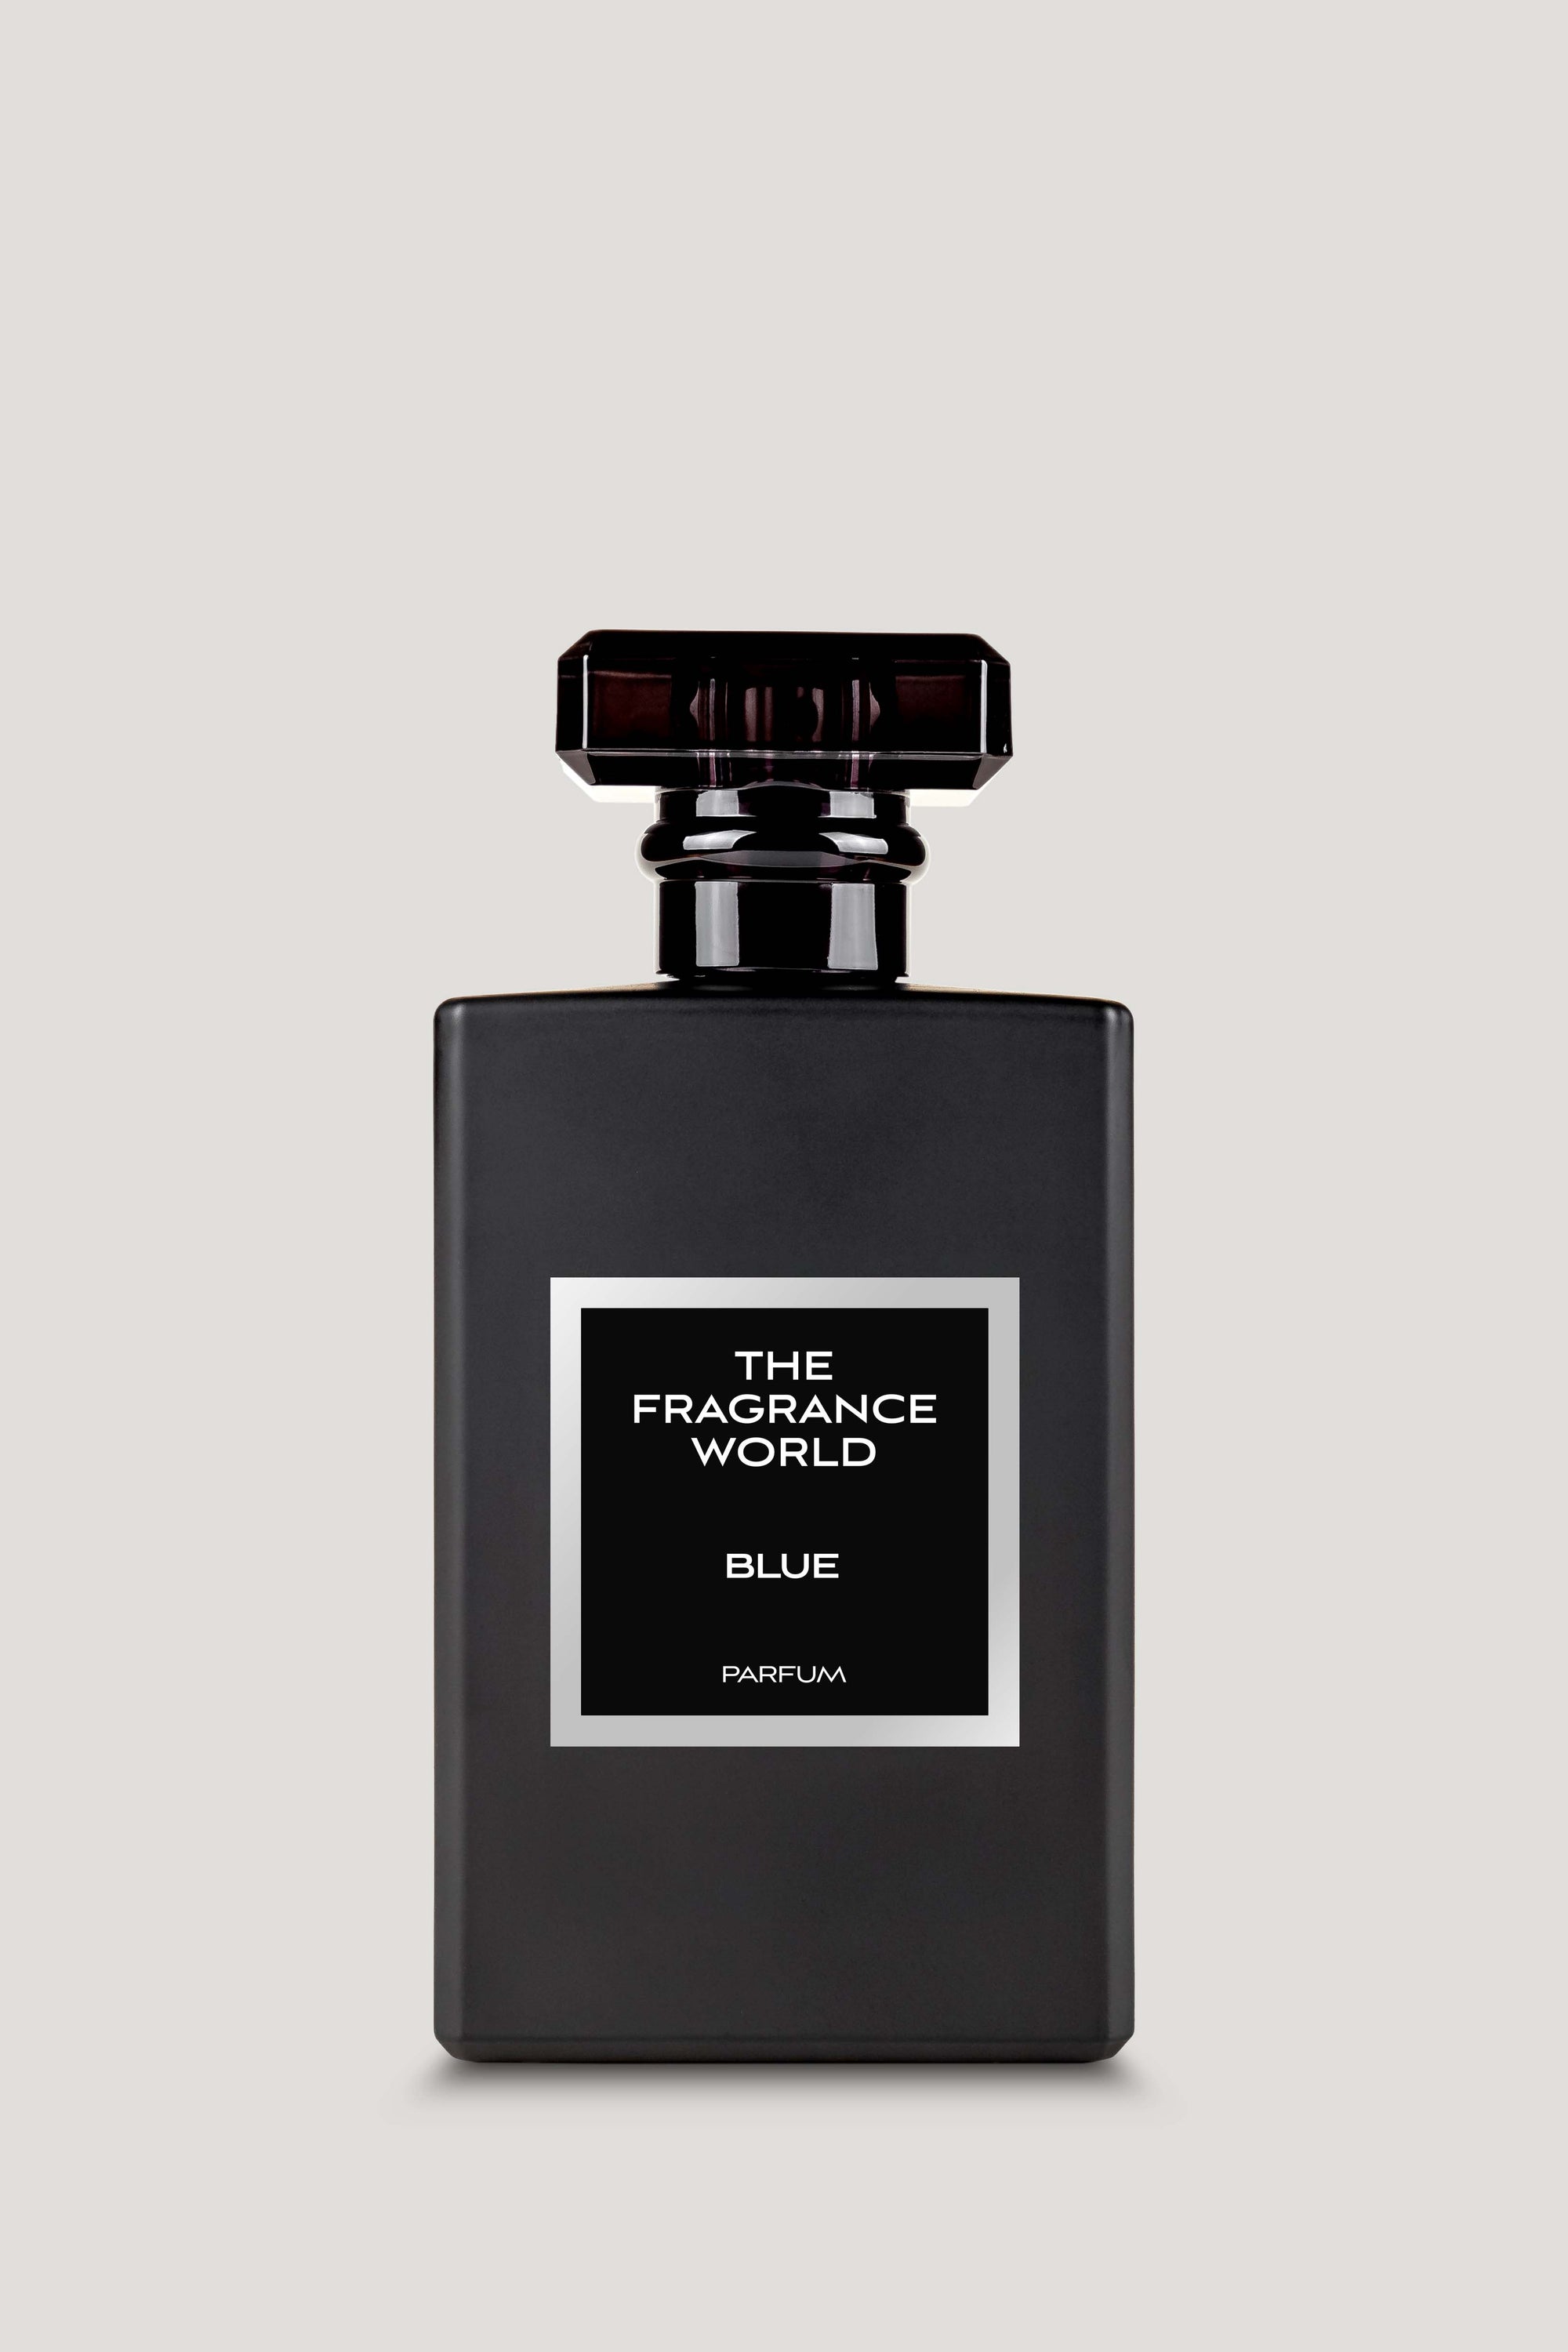 Chanel Inspired Perfume and Aftershave Collection - Fragrance World